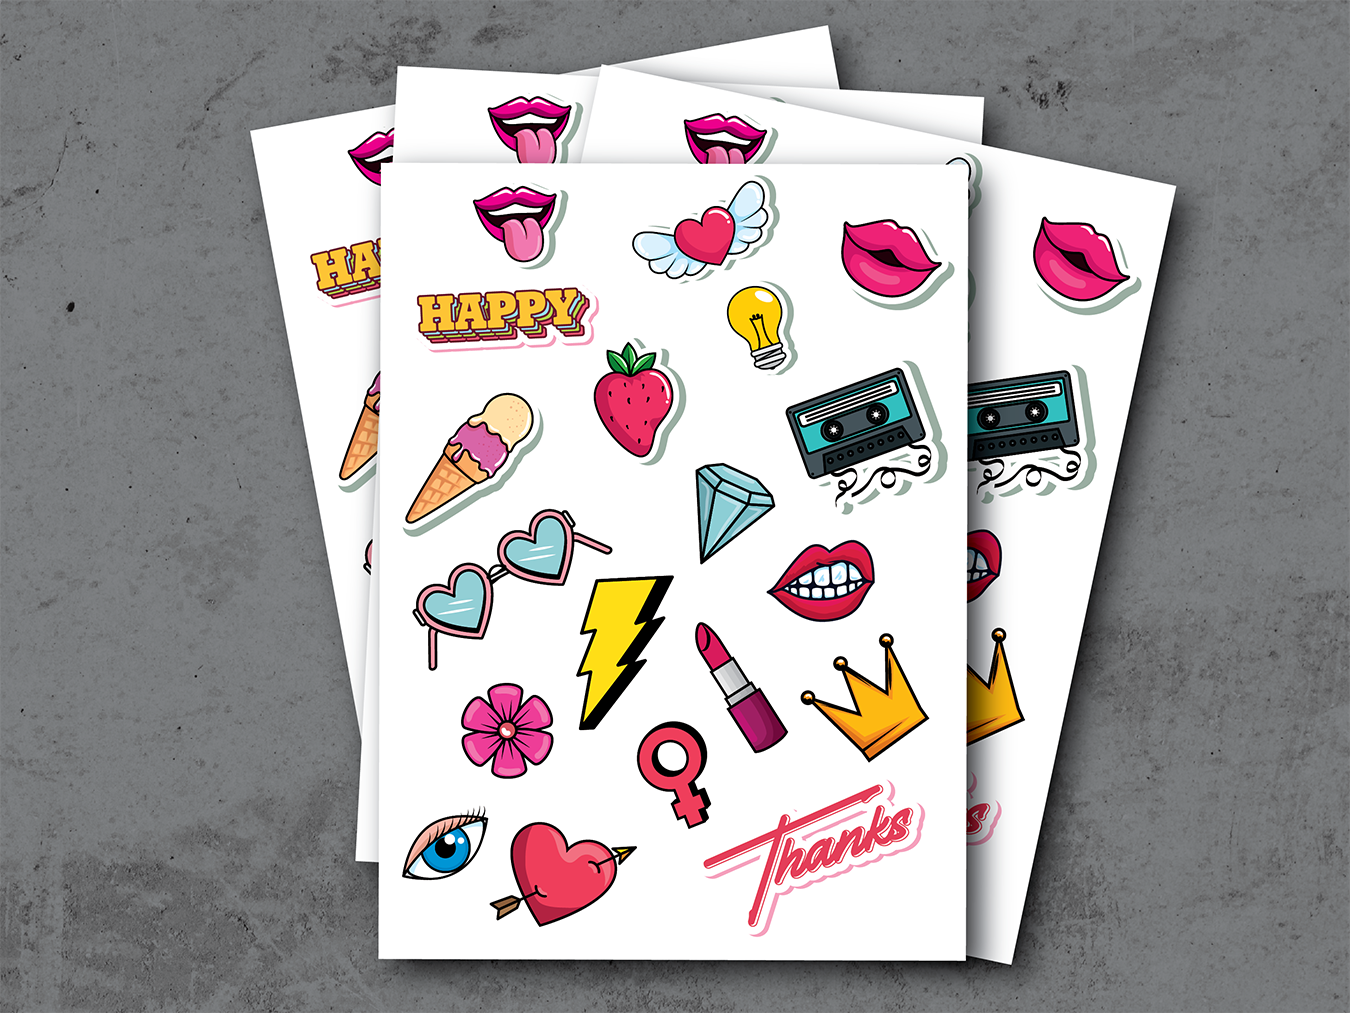 Sticker Sheets - Kiss cut and printed with your designs, finished as sheets.